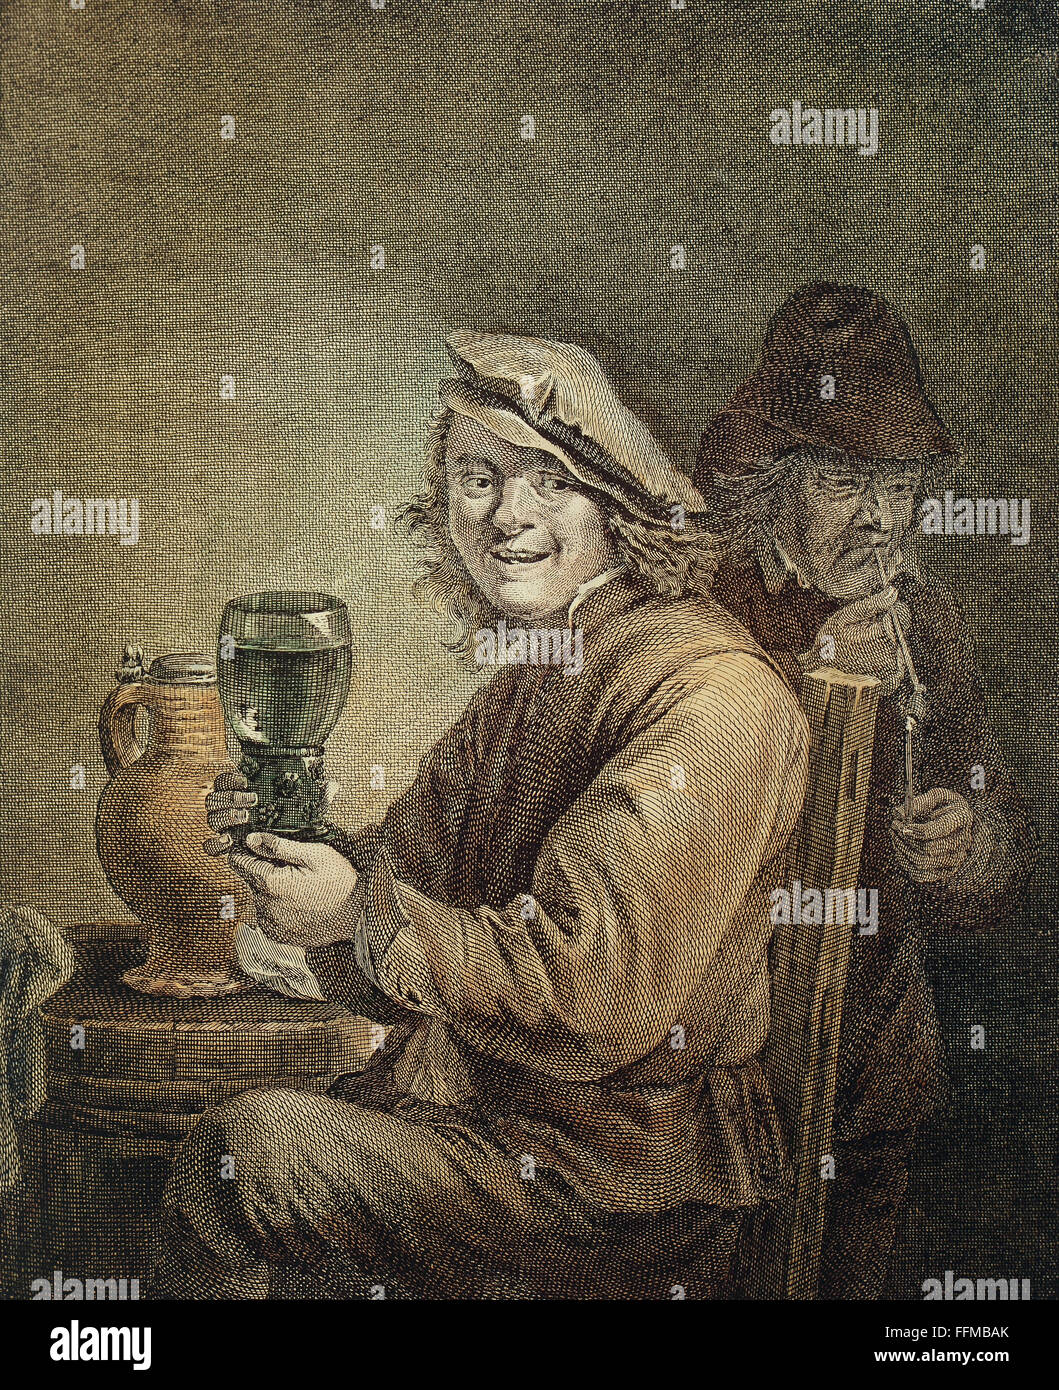 alcohol, grape vine, "At the inn, Flemish peasant with wine glass", after painting by David Teniers the Younger (1610 - 1690), coloured copper engraving by Pierre Chenu (1730 - um 1800), 23,5 x 19 cm, 18th century, private collection, Artist's Copyright has not to be cleared Stock Photo